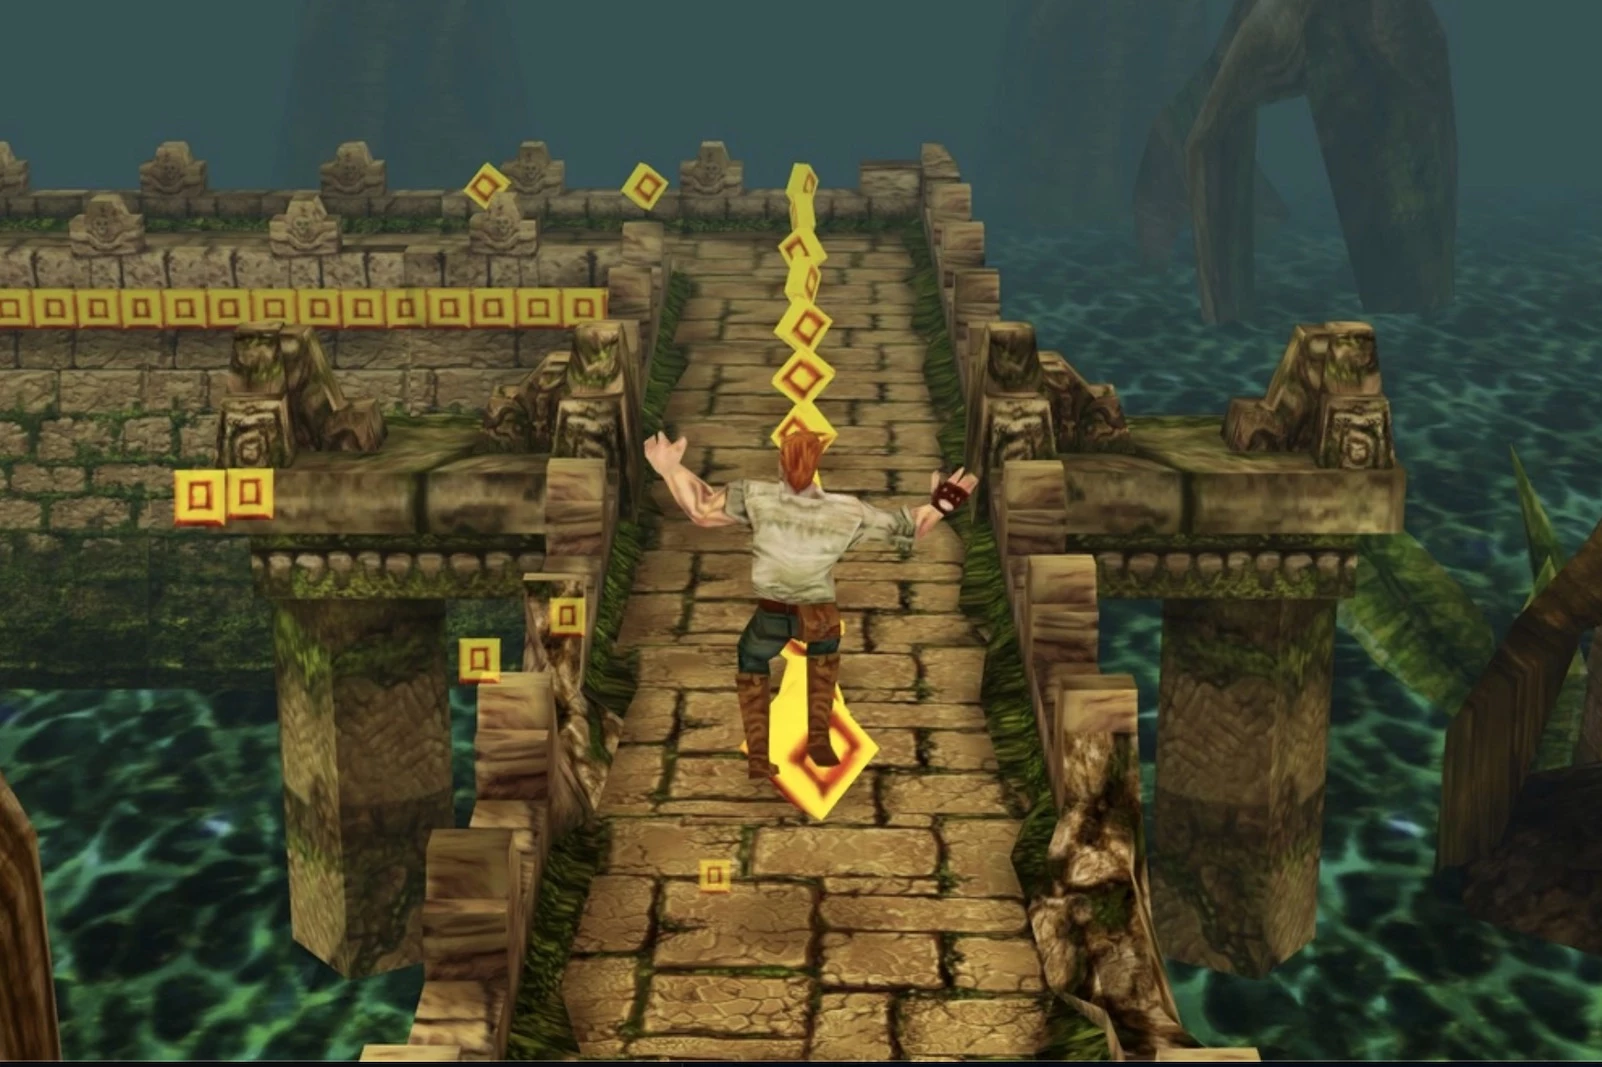 Ah yes, a normal Temple Run game. by Tomthedeviant2 on DeviantArt